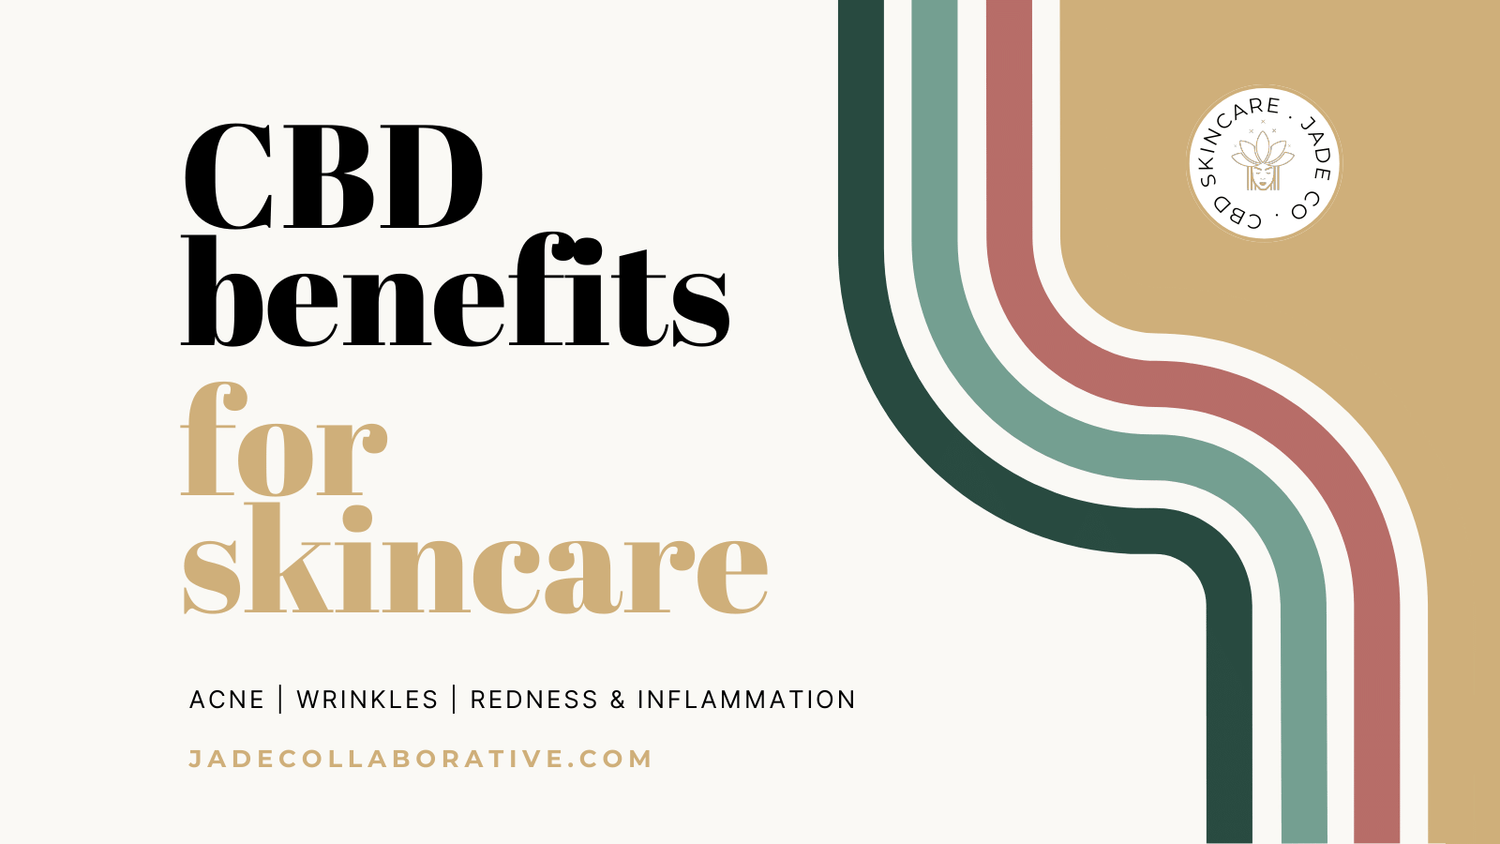 cbd oil benefits for skincare - cbd for acne, wrinkles, and redness by Jade Collaborative